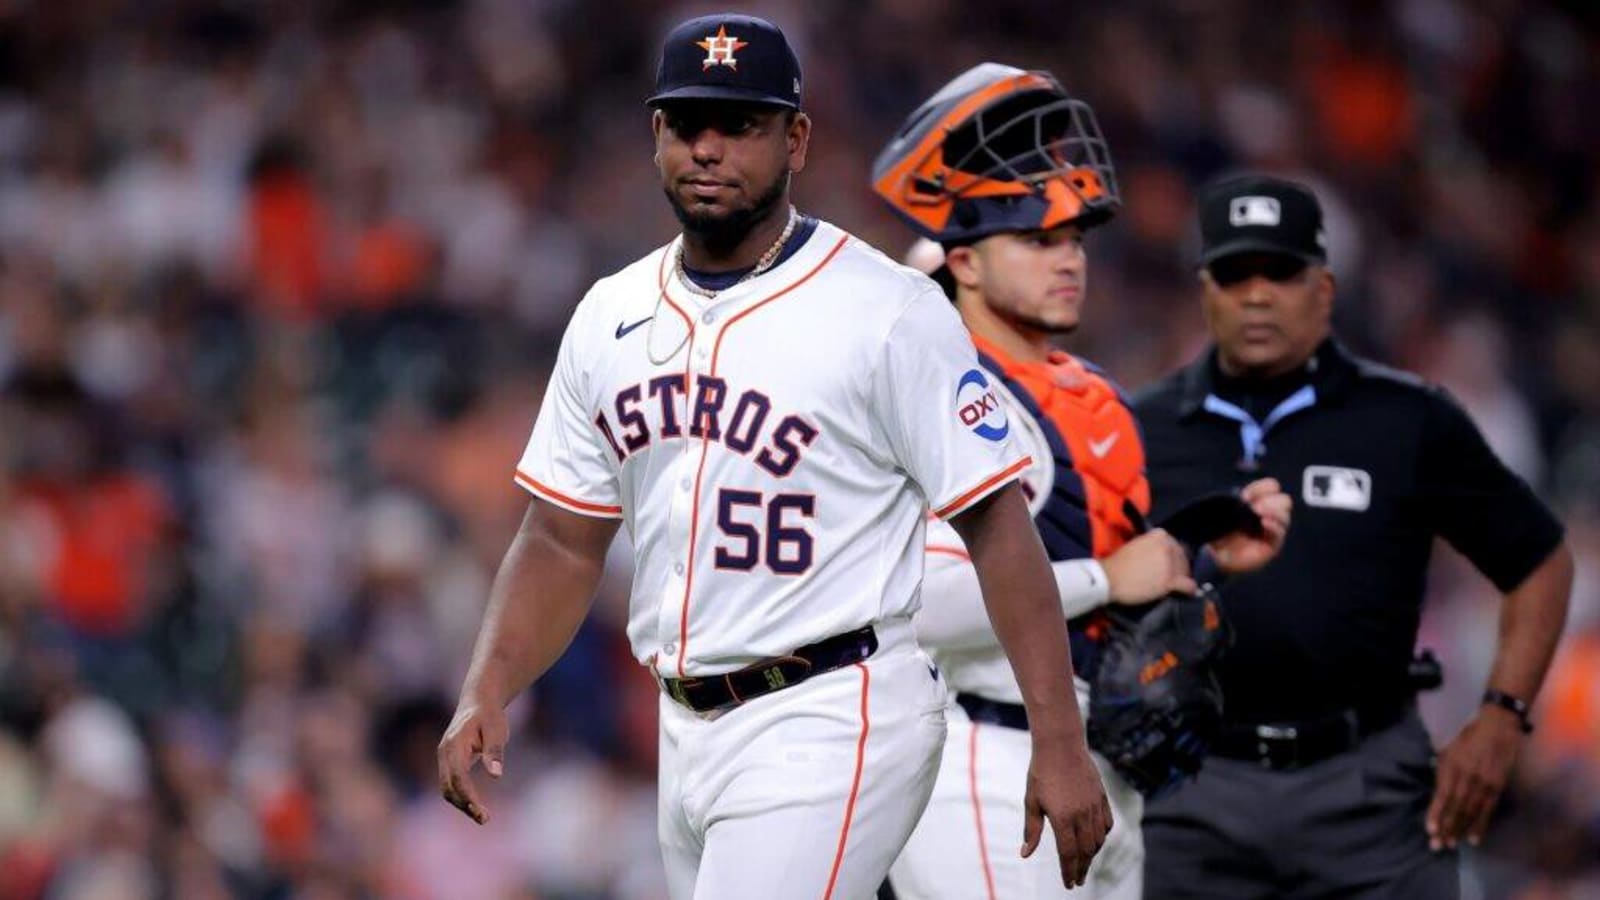 Report: Astros Pitcher Receives Suspension After Foreign Substance Check